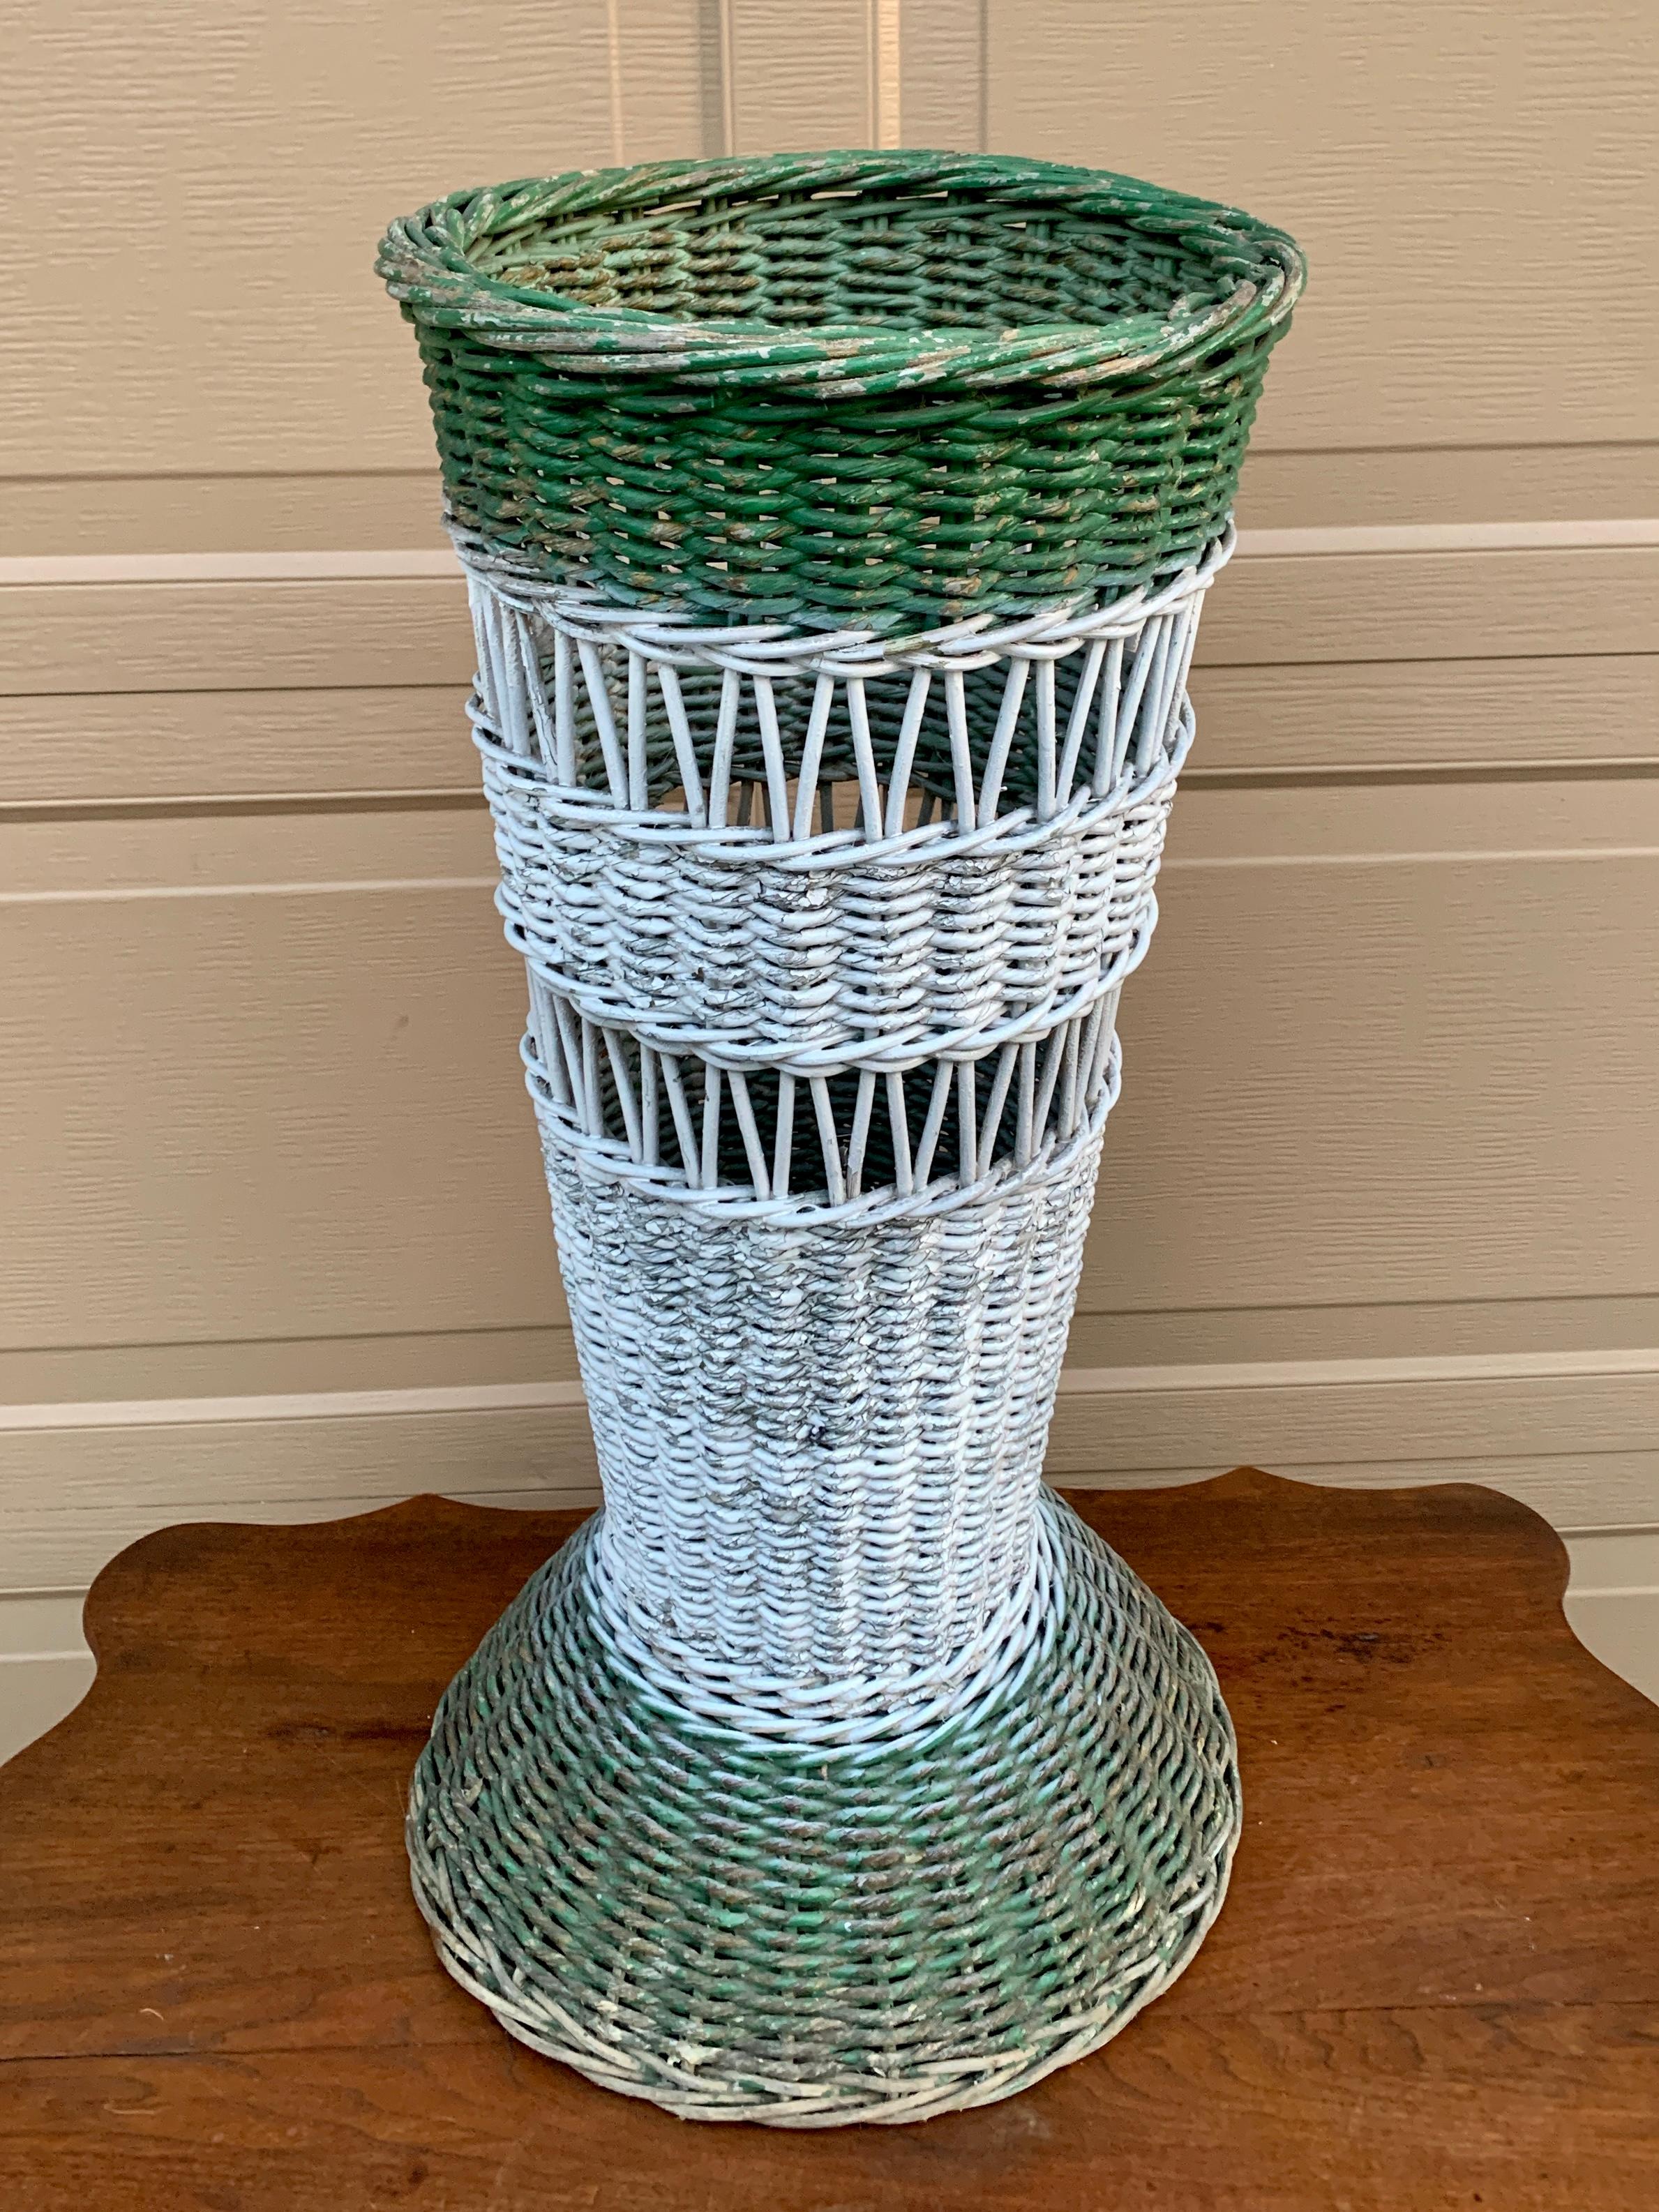 A gorgeous Victorian woven wicker umbrella or cane basket painted in white and green, perfectly wonky to add character to any space

USA, Late 19th Century

Measures: 13.5